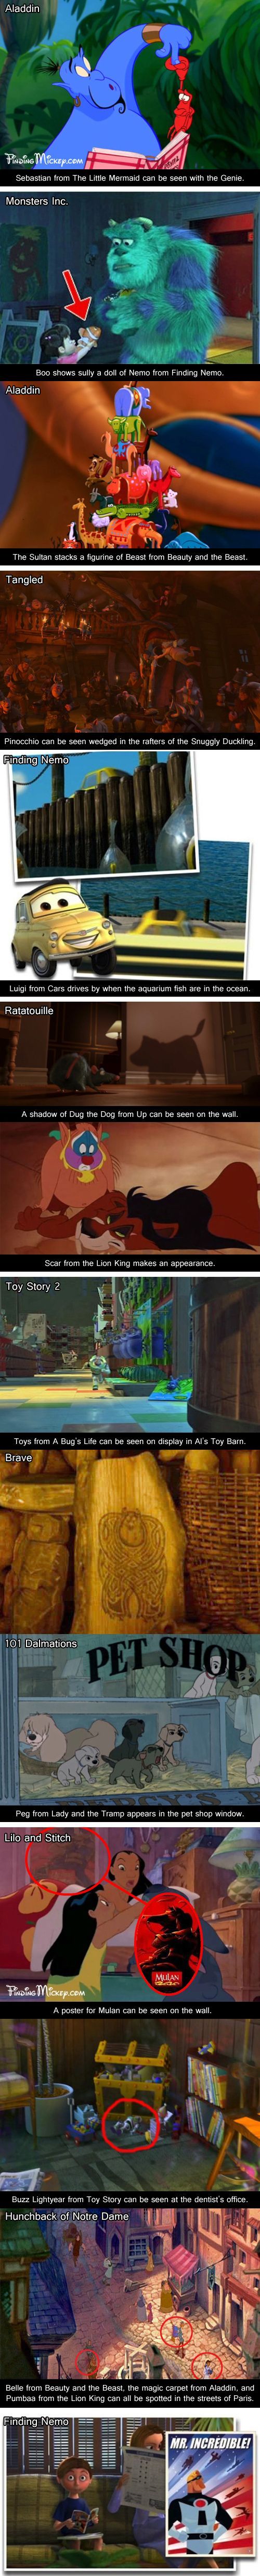 You obsess over finding every little hidden secret: | 25 Signs You Grew Up With Disney This makes me question my entire